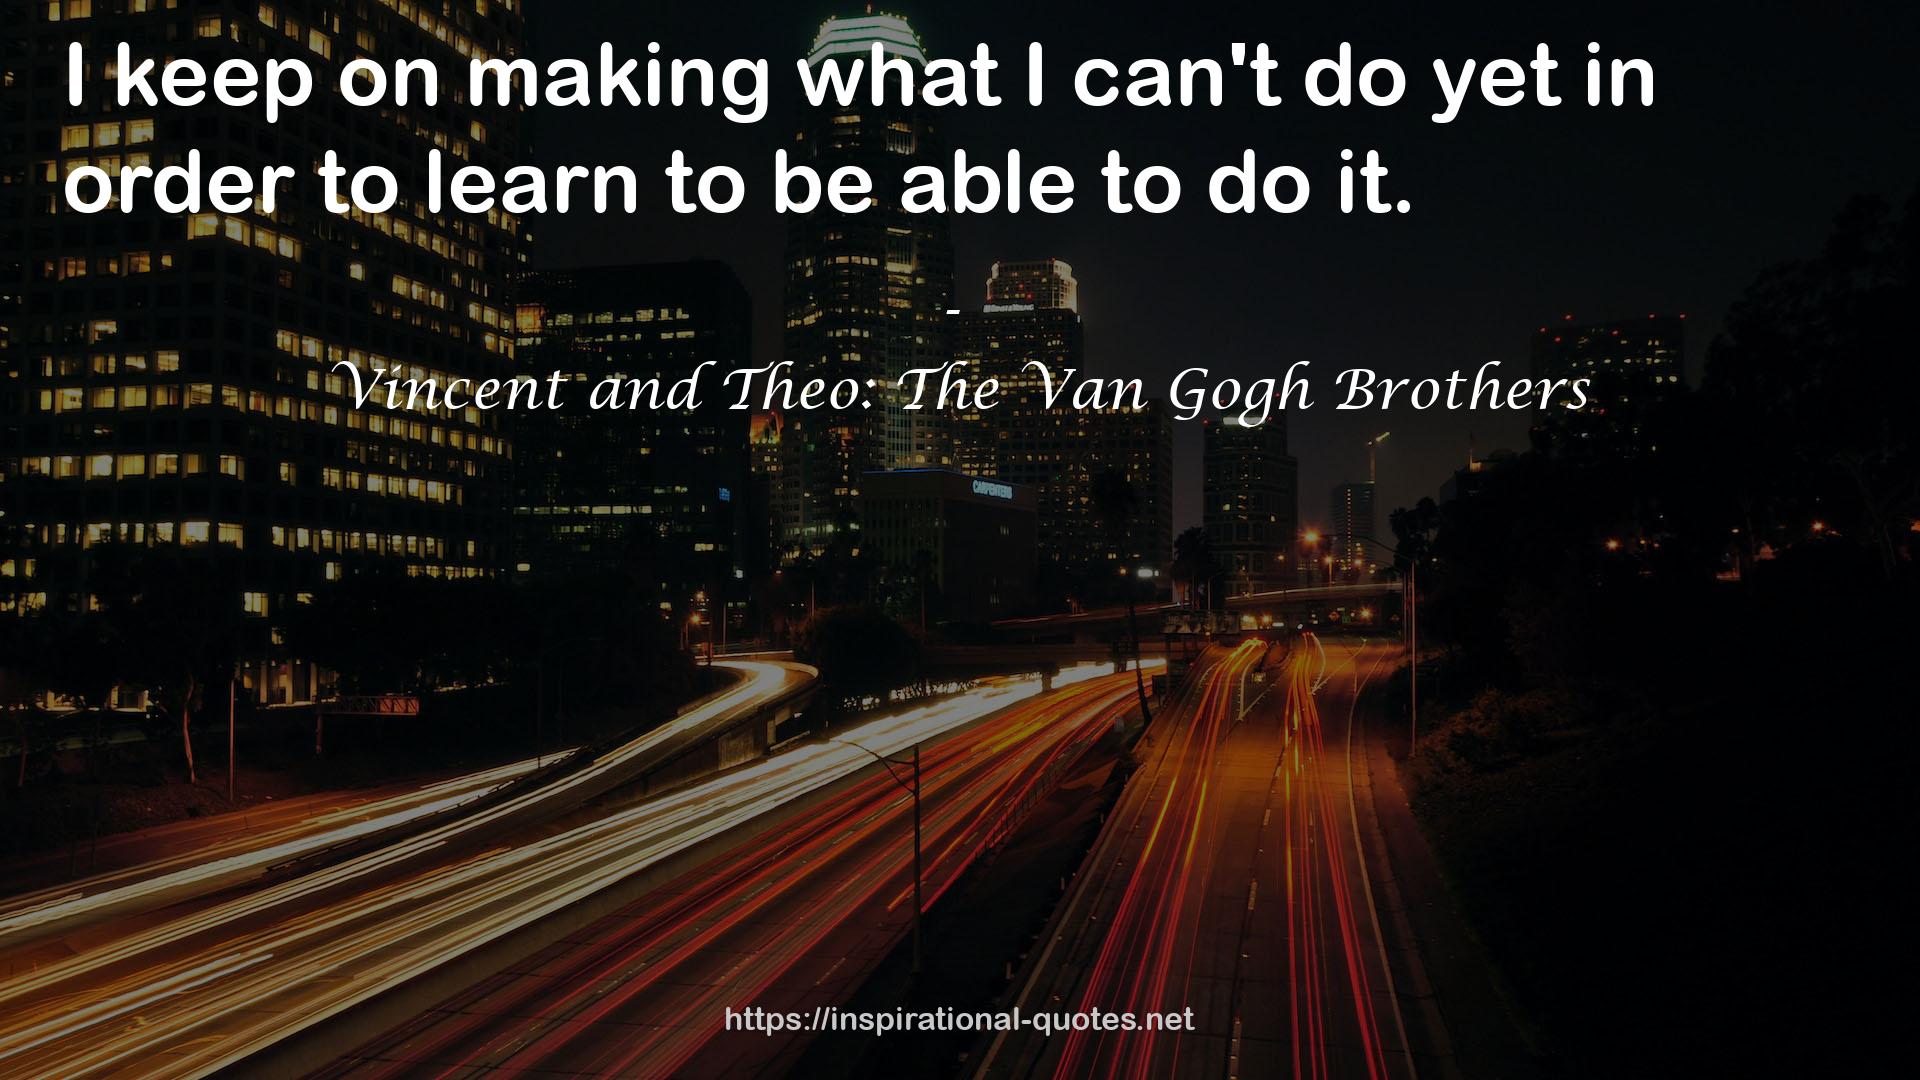 Vincent and Theo: The Van Gogh Brothers QUOTES